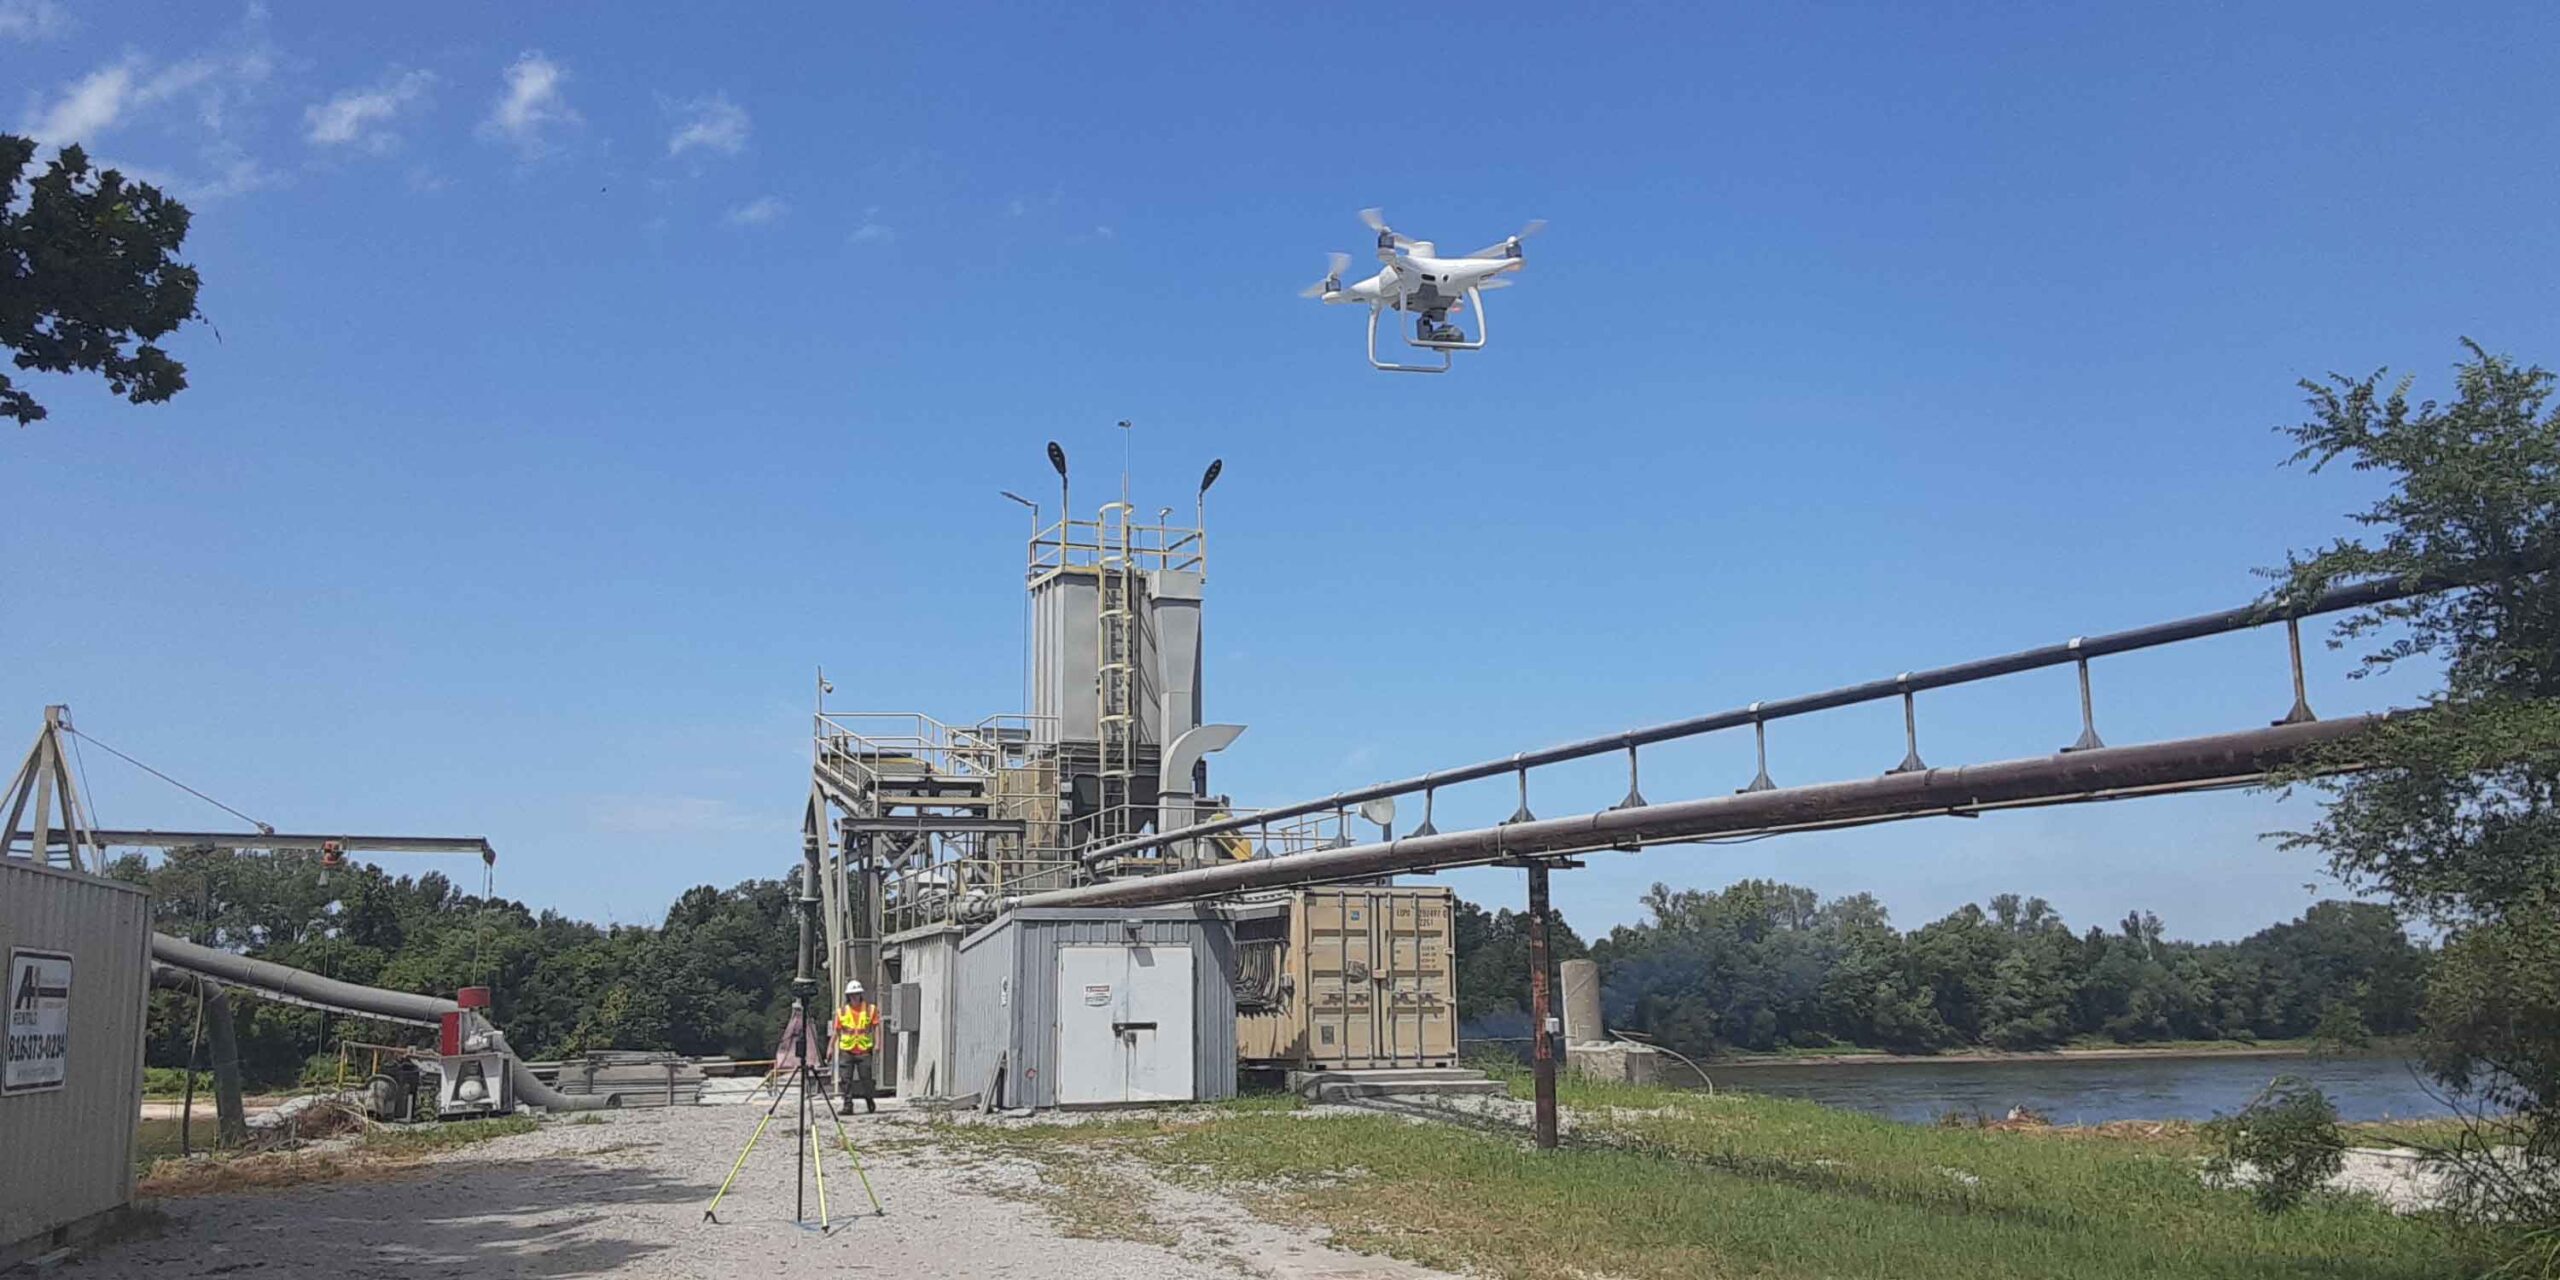 Drone flying at a cement plant